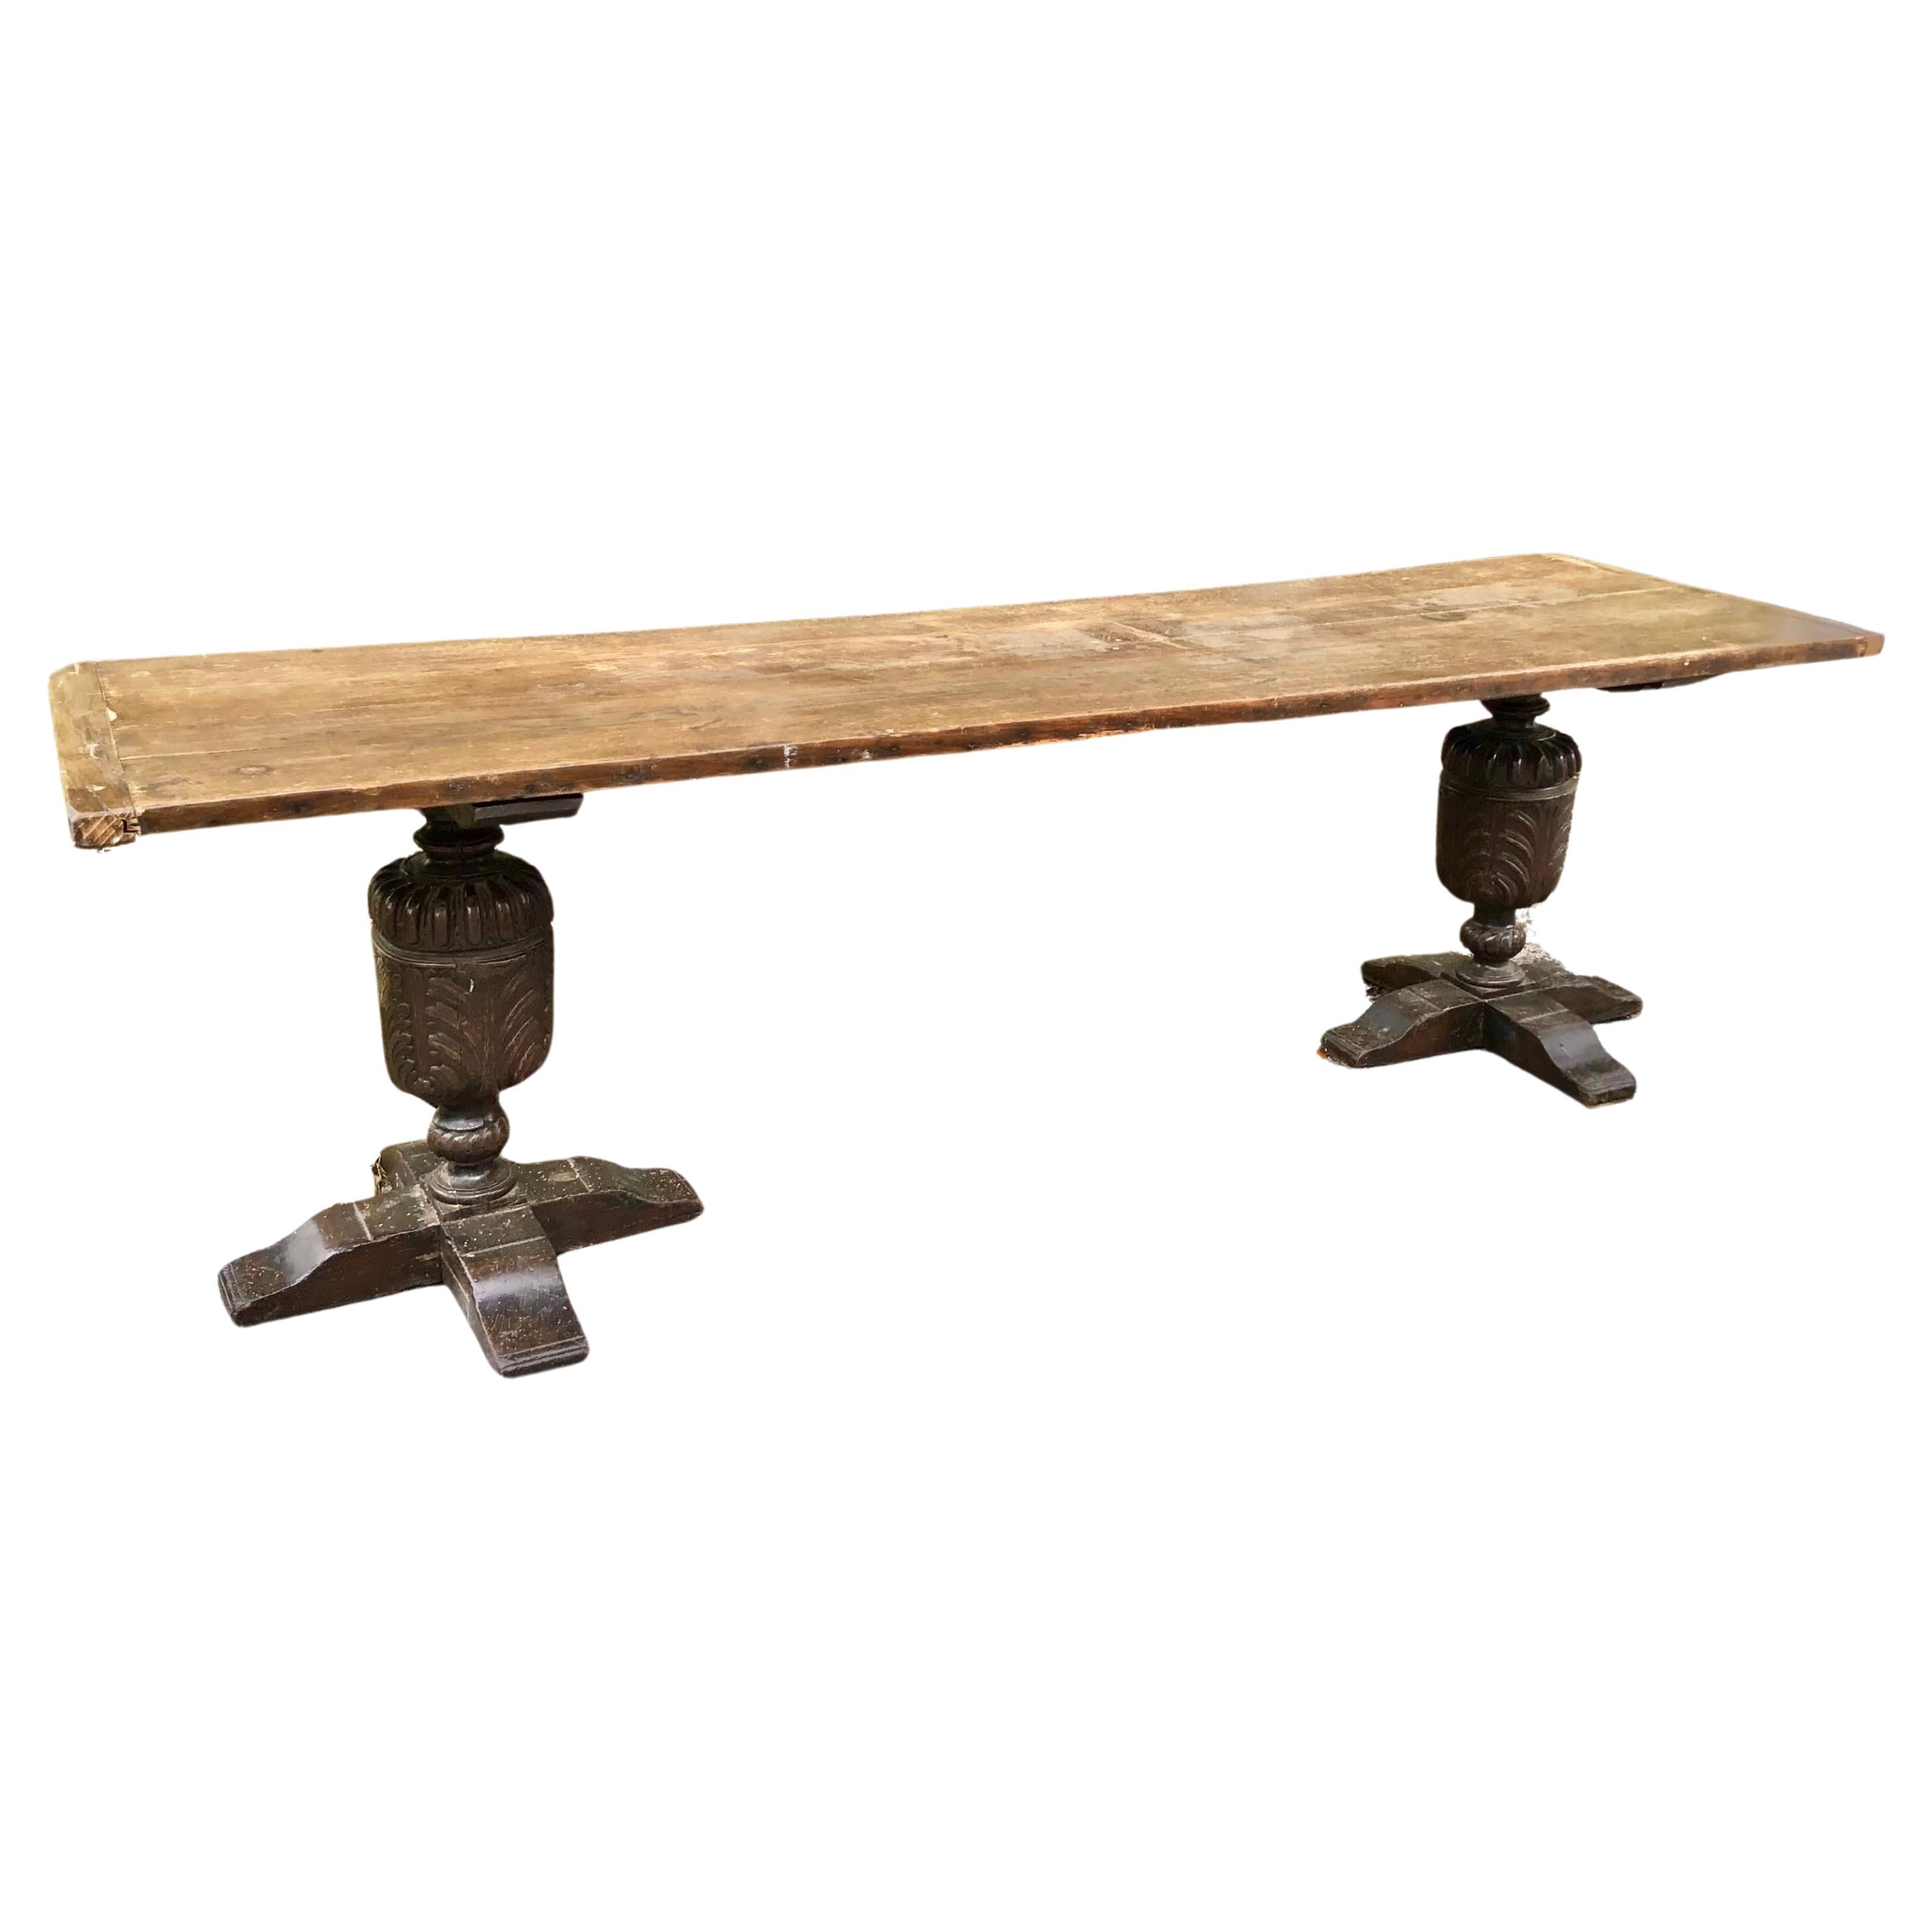 Large 18th Century English Oak Refectory Table